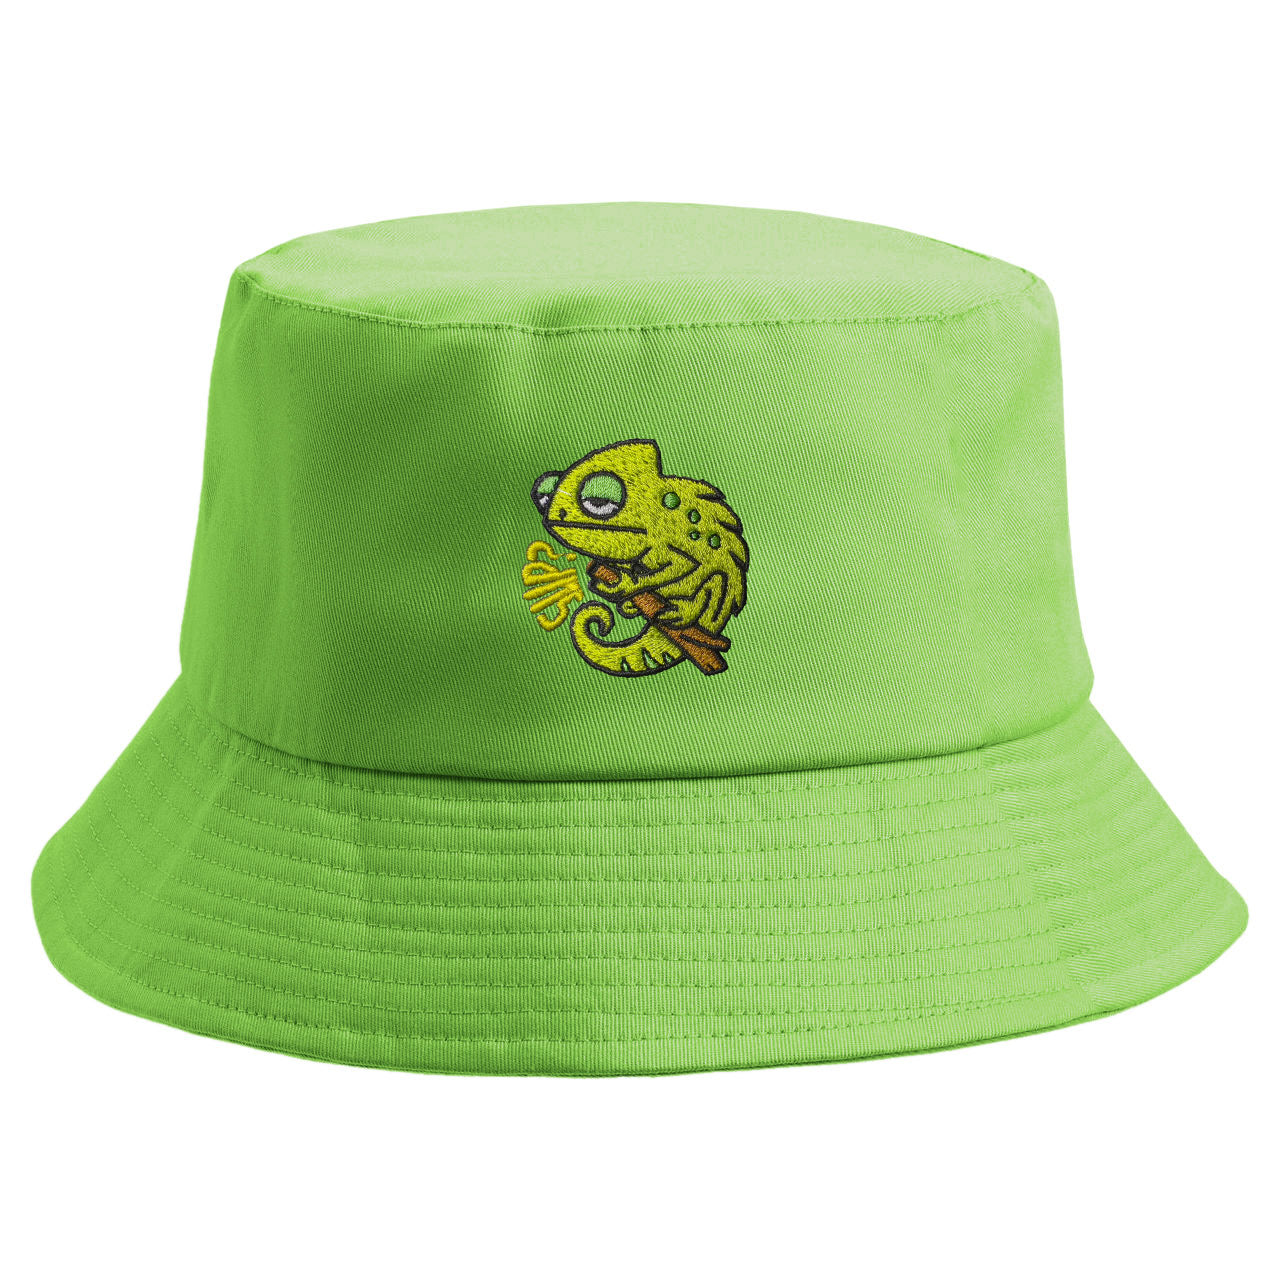 Embroidered SUP Bucket Hat